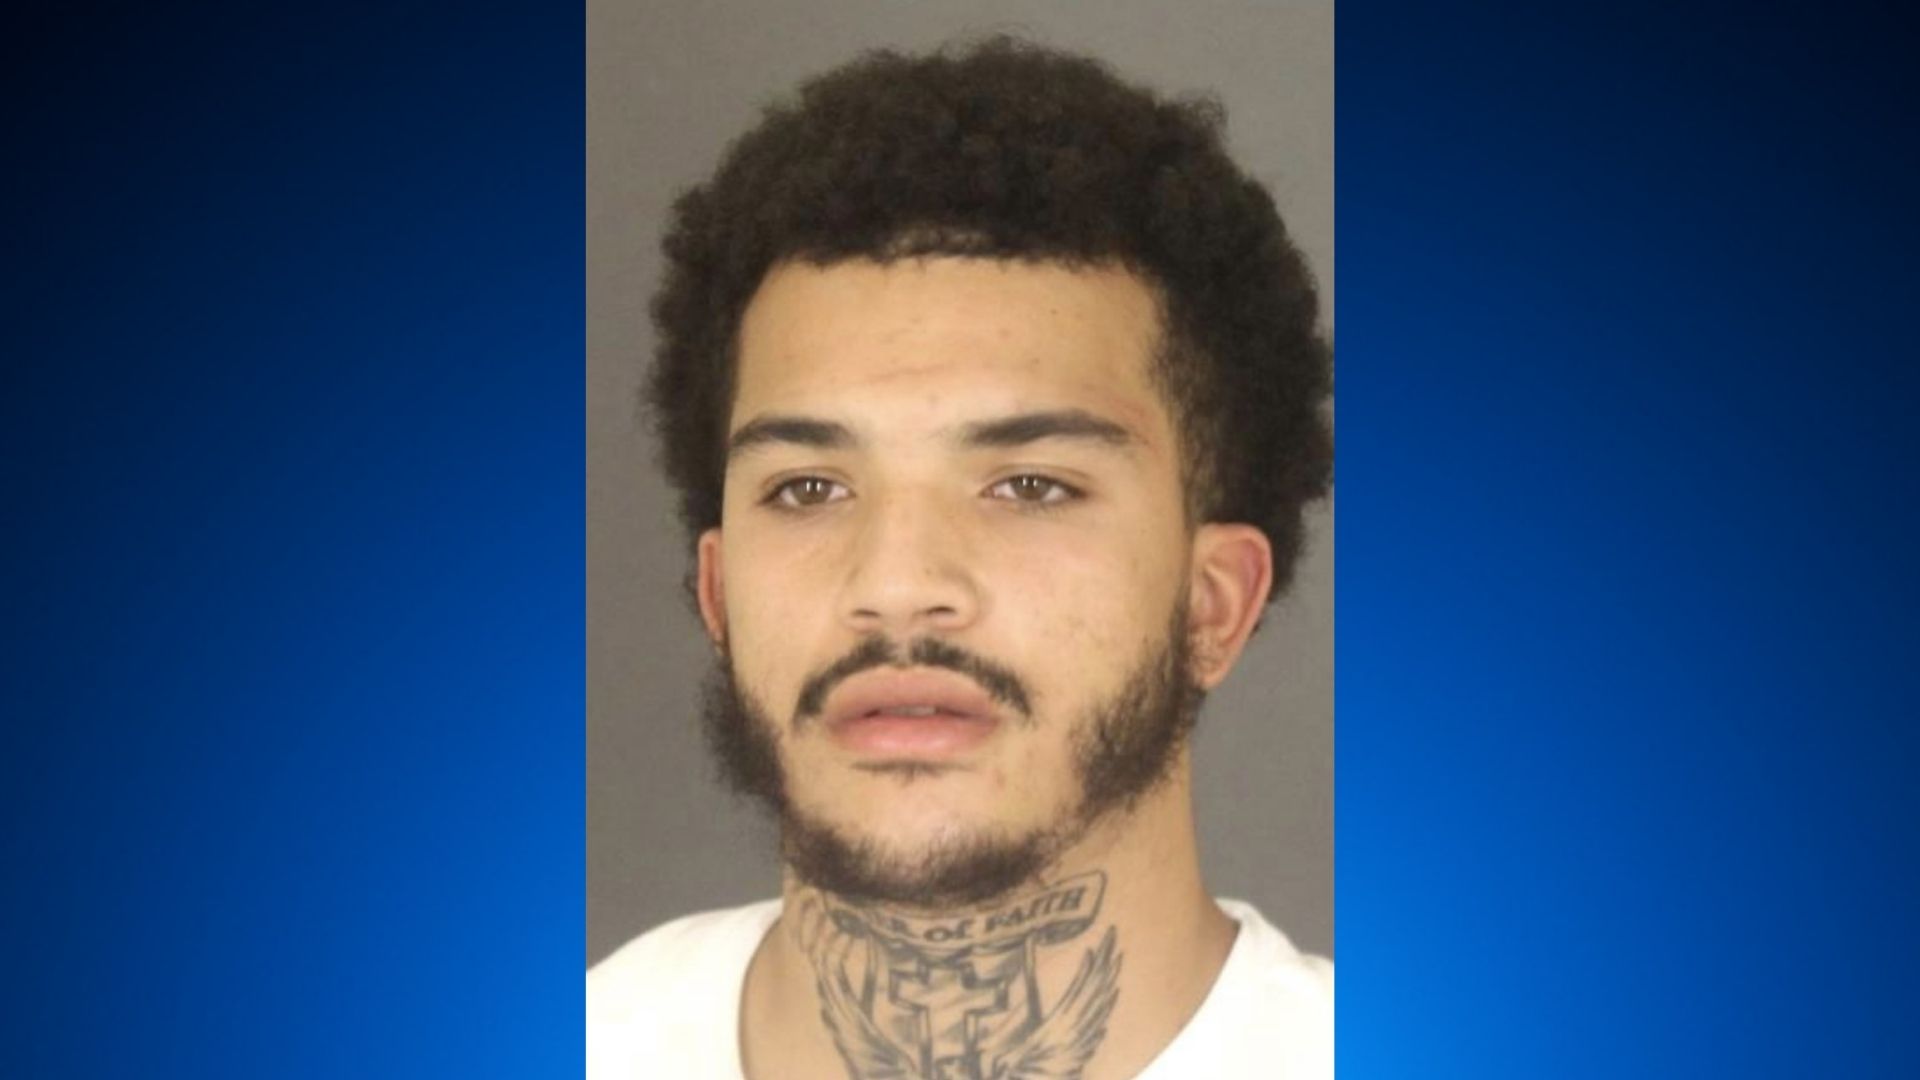 Baltimore Man, 20, Charged With Attempted Murder In Shooting